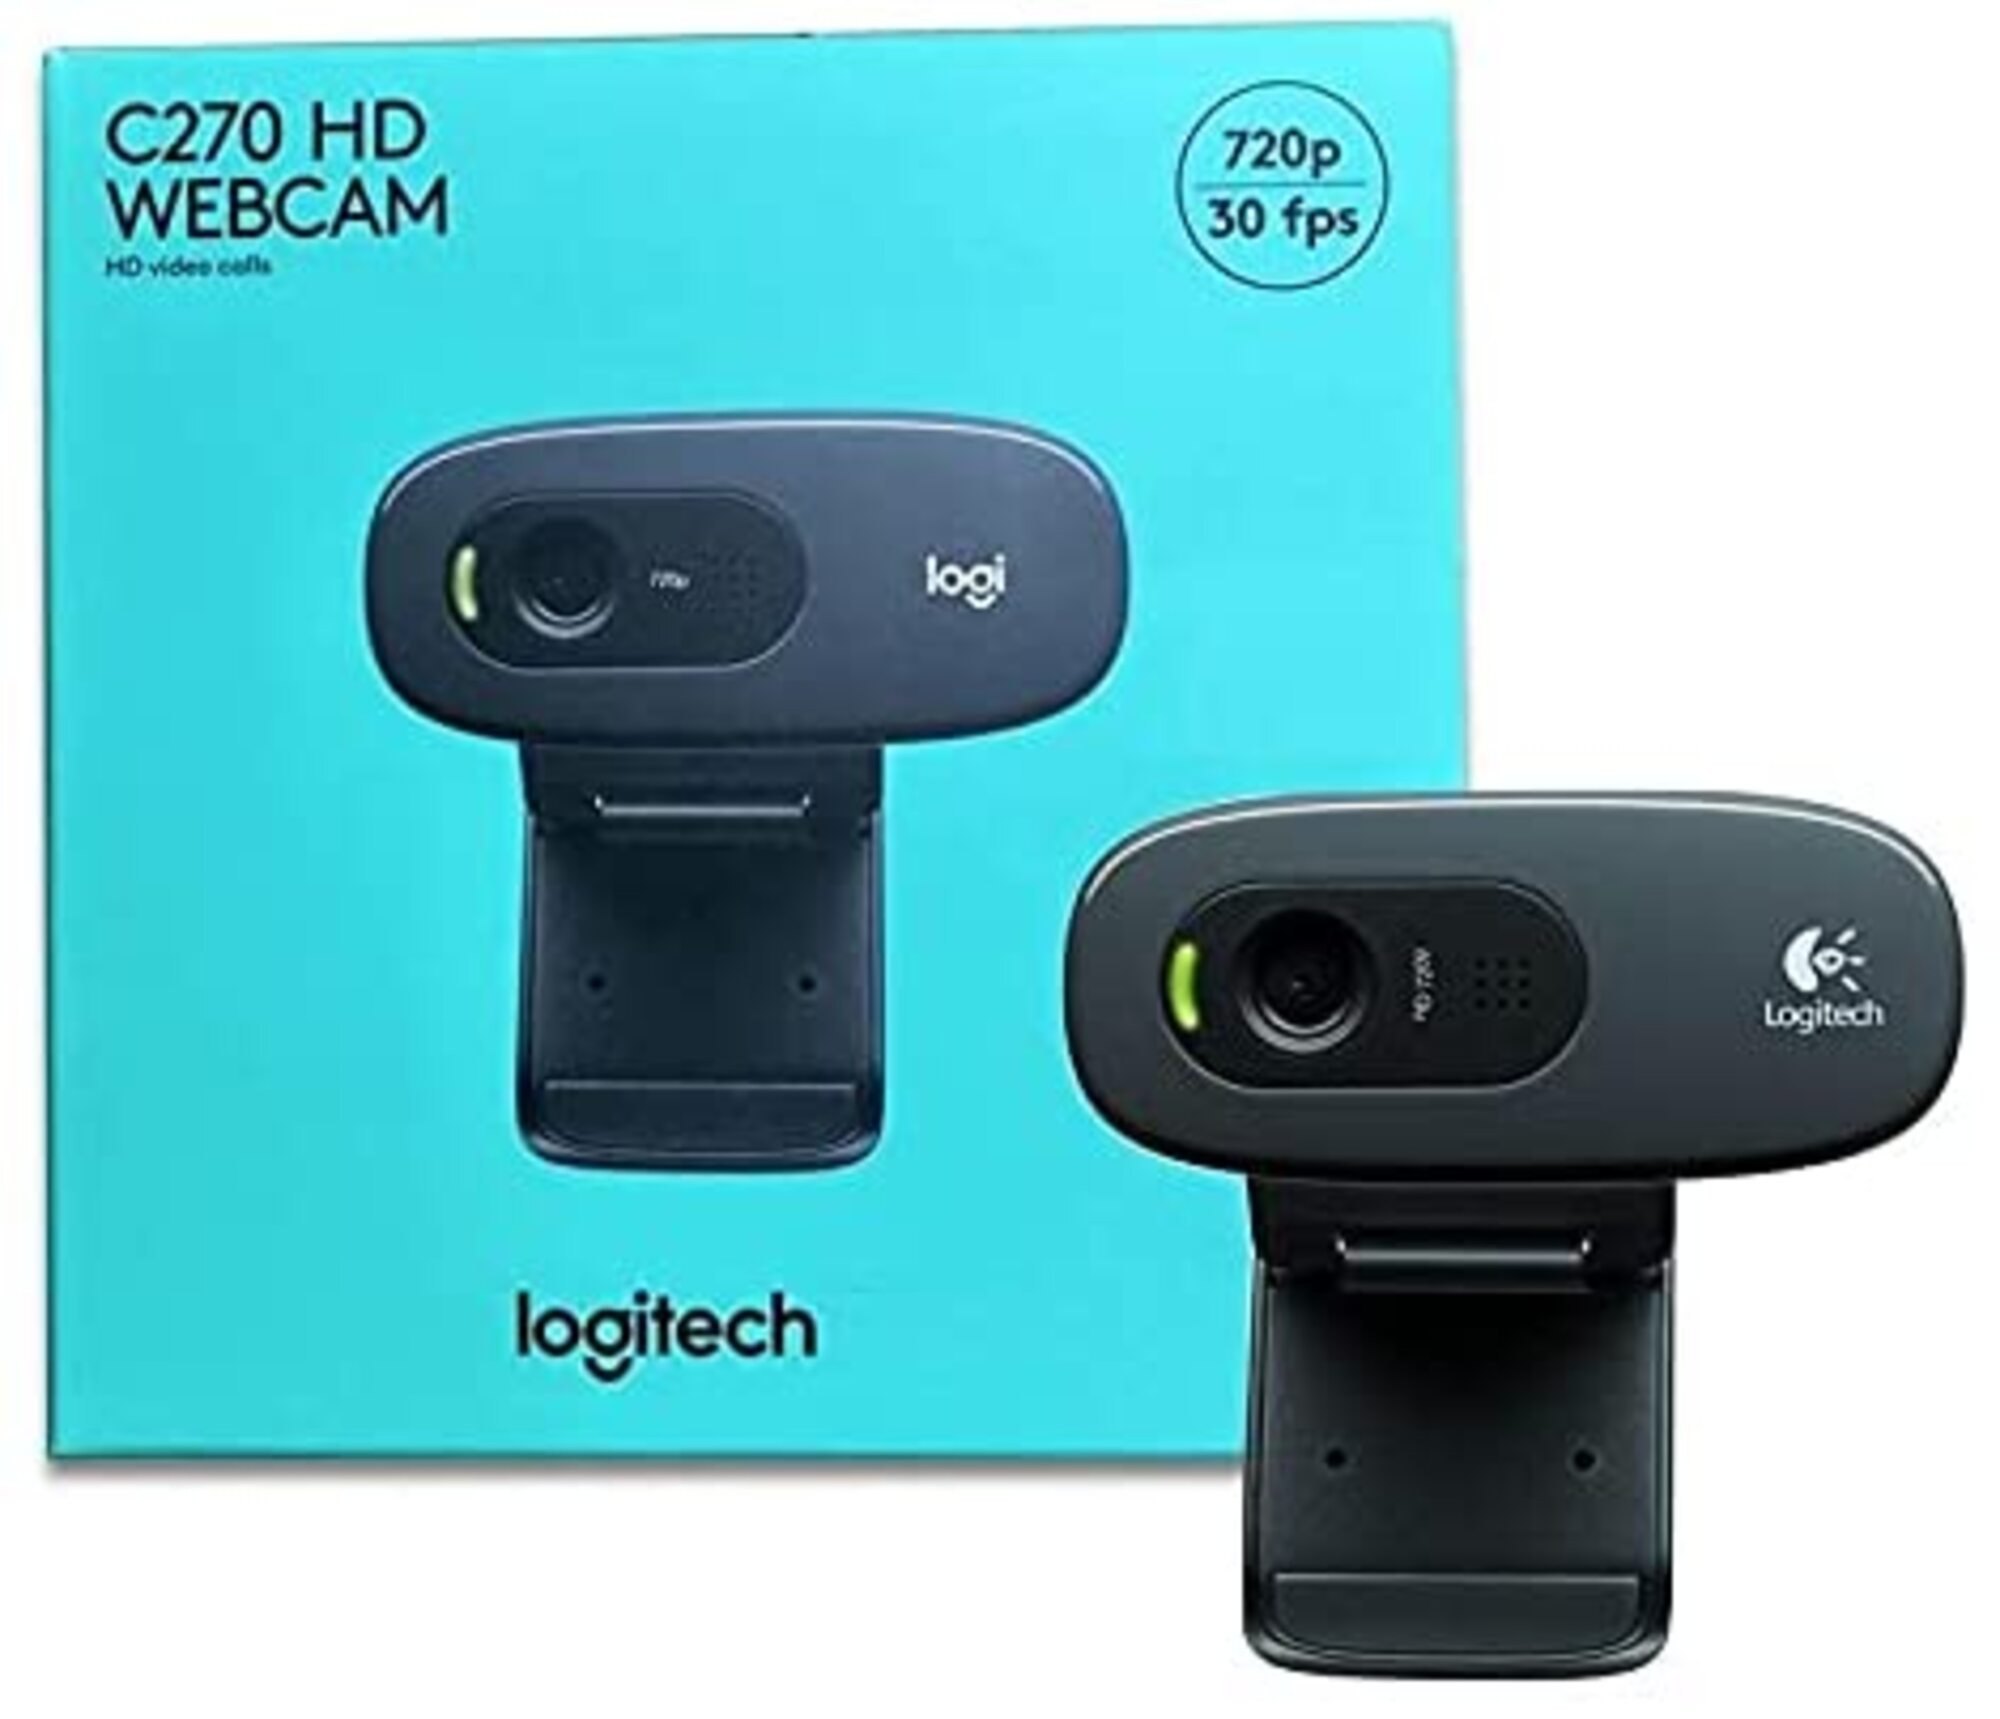 Logitech C270 HD Webcam, 720p Video with Noise Reduction – Canwest